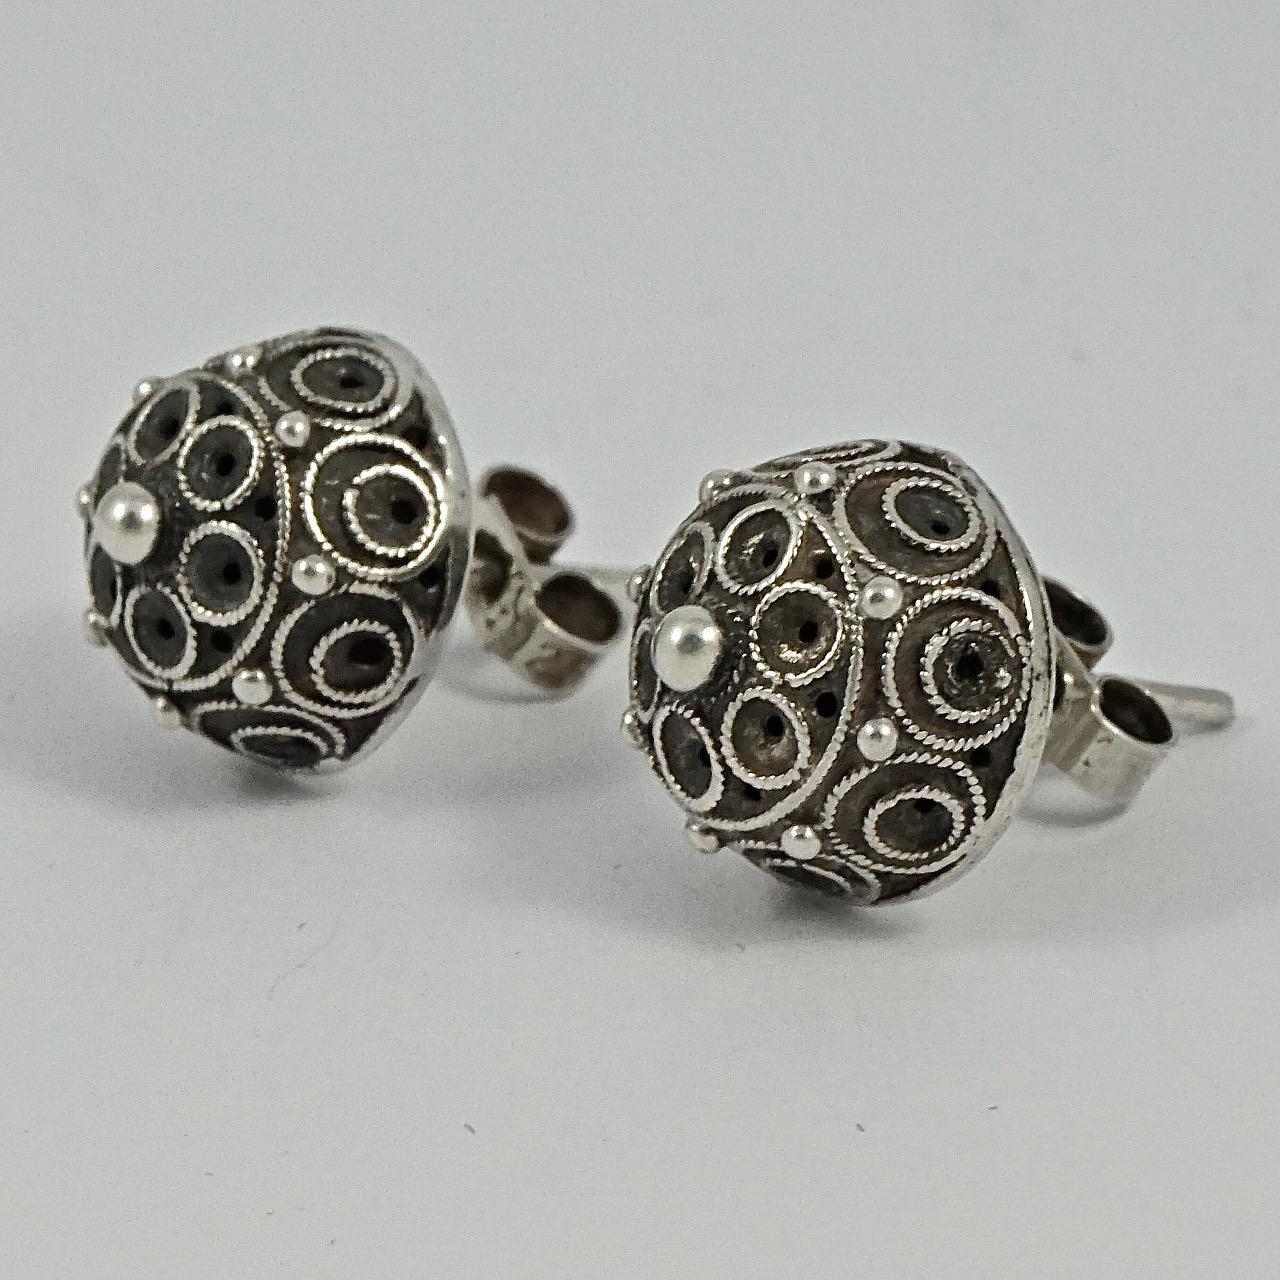 Beautiful antique silver Etruscan Revival dome earrings, featuring applied wire work and ball detail. Measuring diameter 1.2cm / .47 inch, they are unmarked but test for silver. The earrings are hollow and light to wear, they have butterfly backs.